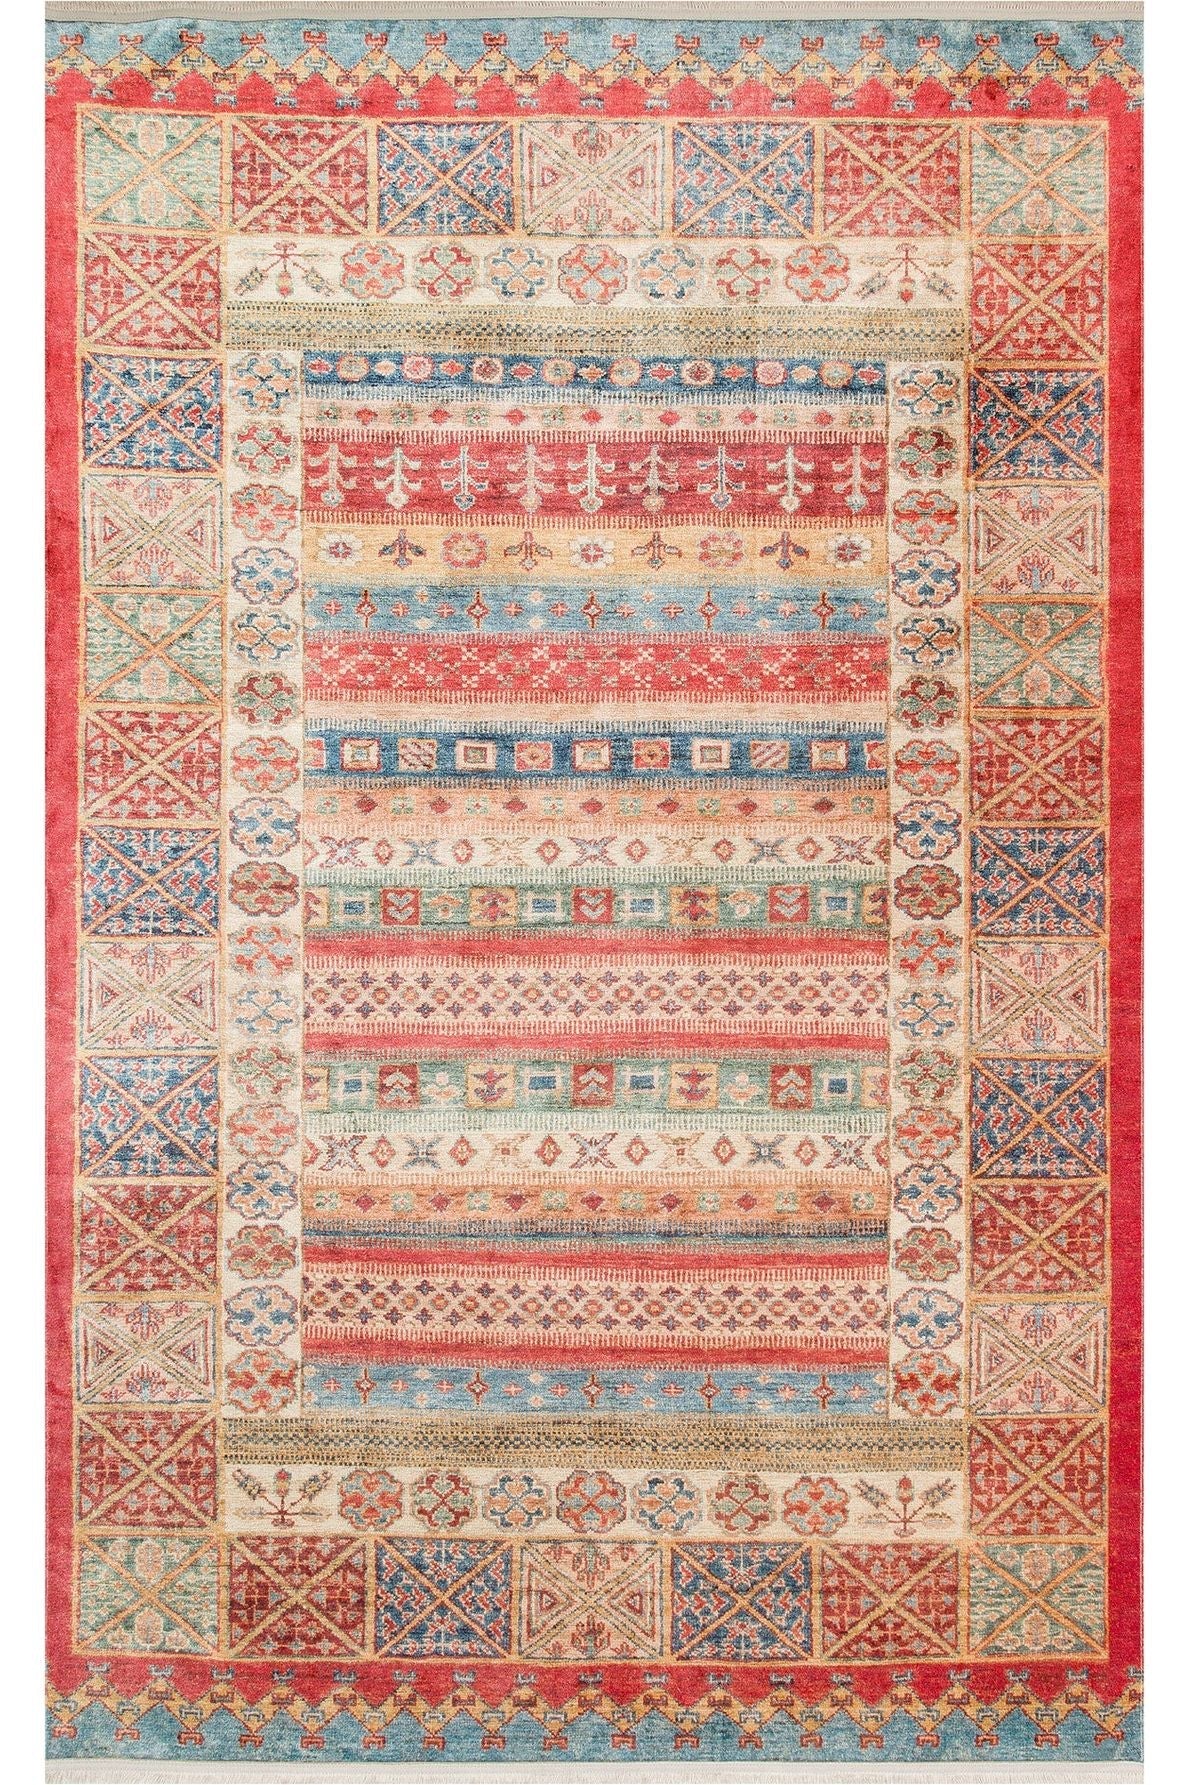 #Turkish_Carpets_Rugs# #Modern_Carpets# #Abrash_Carpets#User-Friendly Washable Anti-Slippery Made Carpets With Antique DesignsAtk 04 Multy